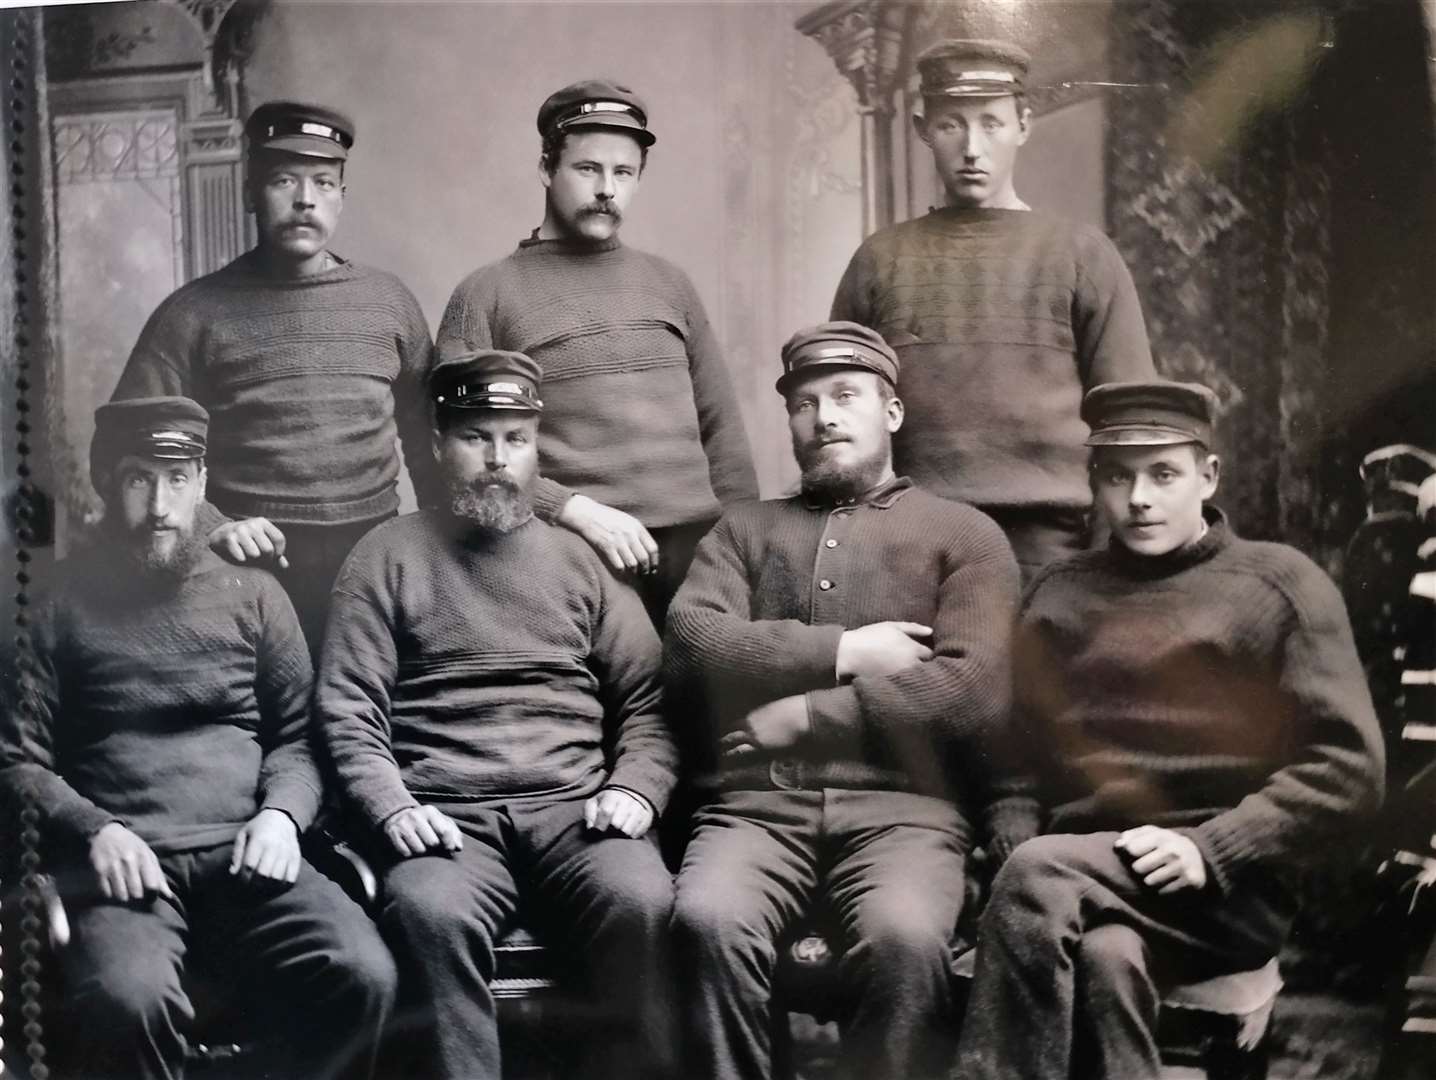 An image from the Johnston Collection showing local fishermen wearing ganseys. Picture reproduced courtesy of the Wick Society / Johnston Collection